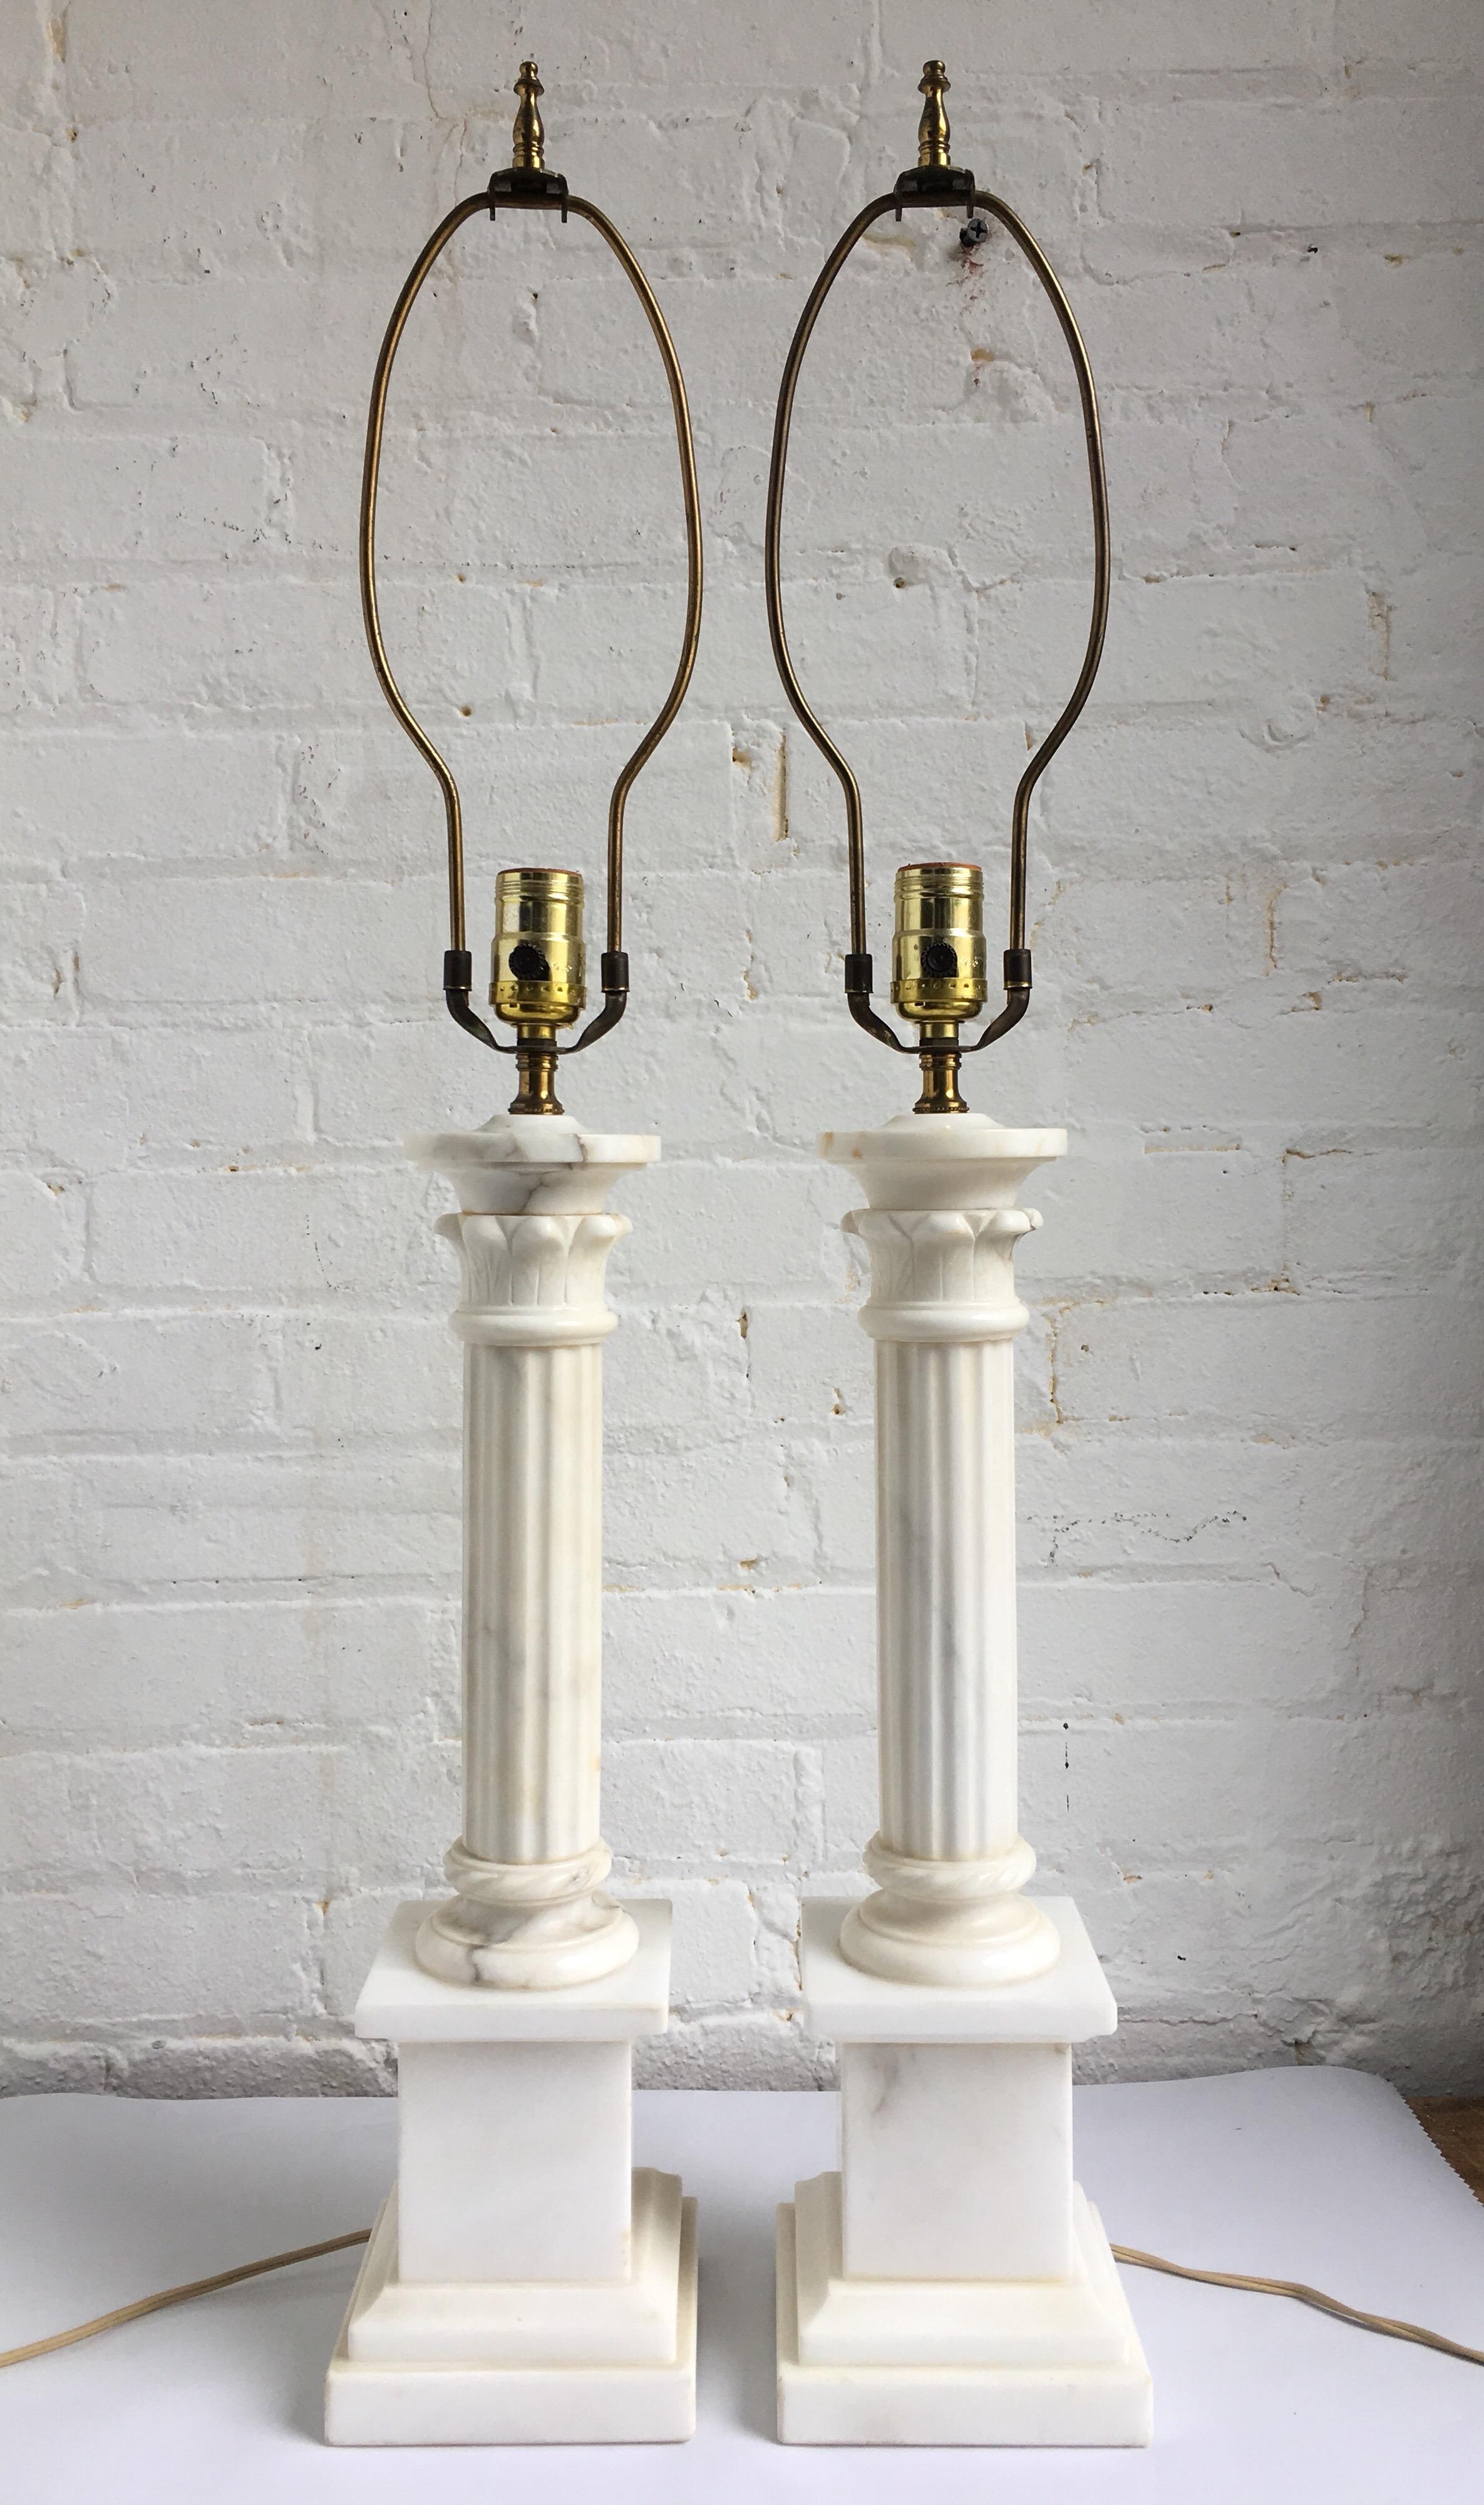 Pair of warm white marble carved column table lamps with square plinth bases. Italy, circa 1950. Lamp shades not included. 

Measures: 32.5 Inches high to harp.
21.5 Inches high to socket.